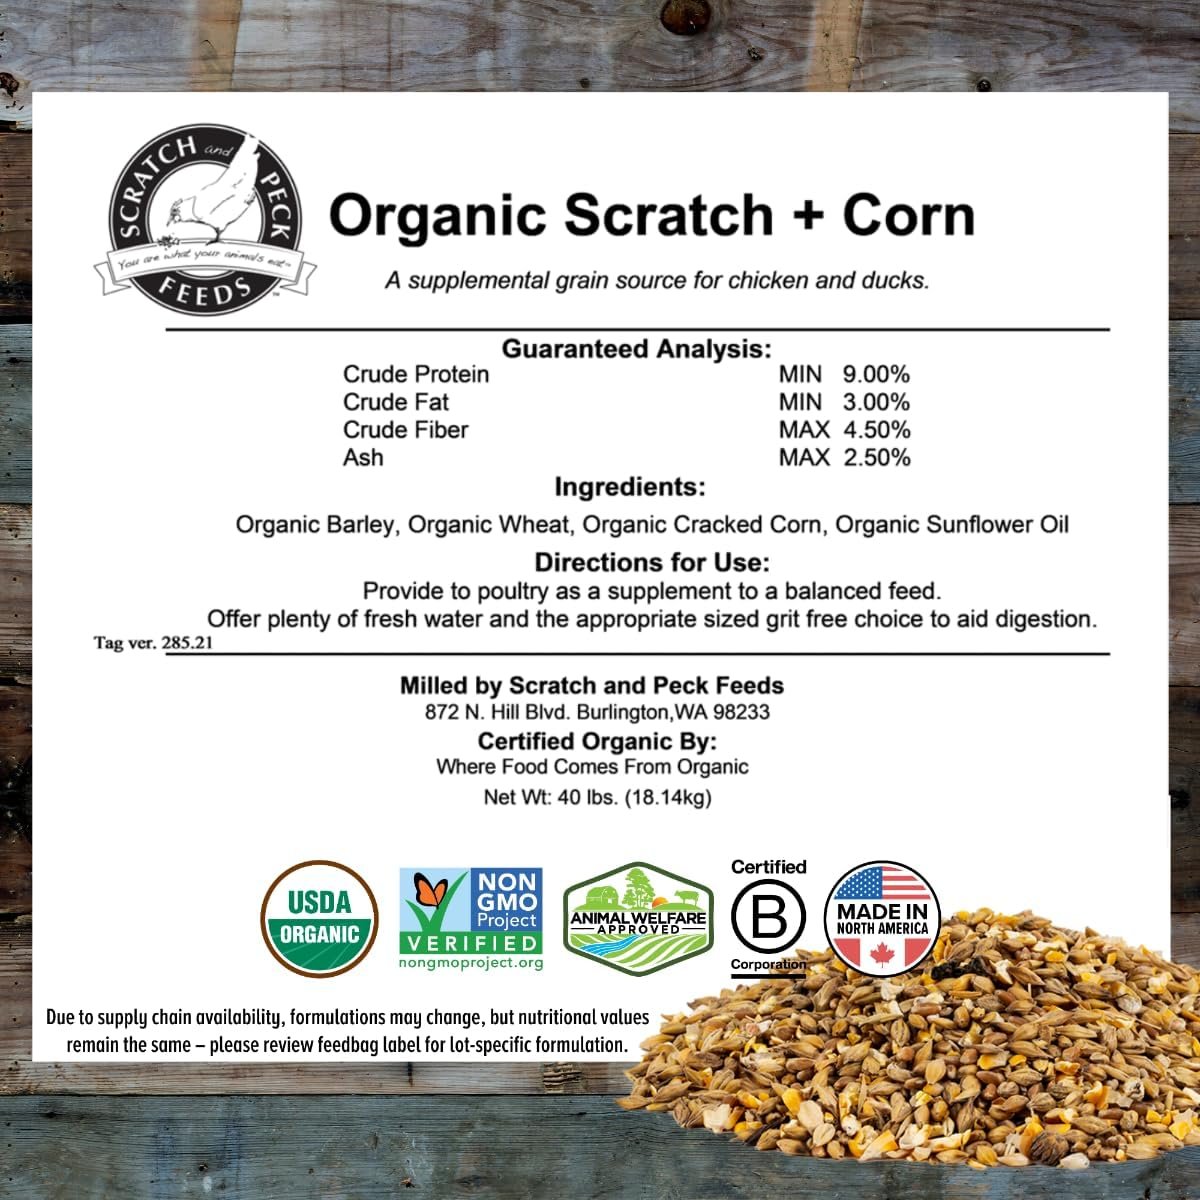 Scratch and Peck Feeds Organic Scratch + Corn, 9% Protein - Premium Supplemental Grain Source for Chickens and Ducks - 25lb